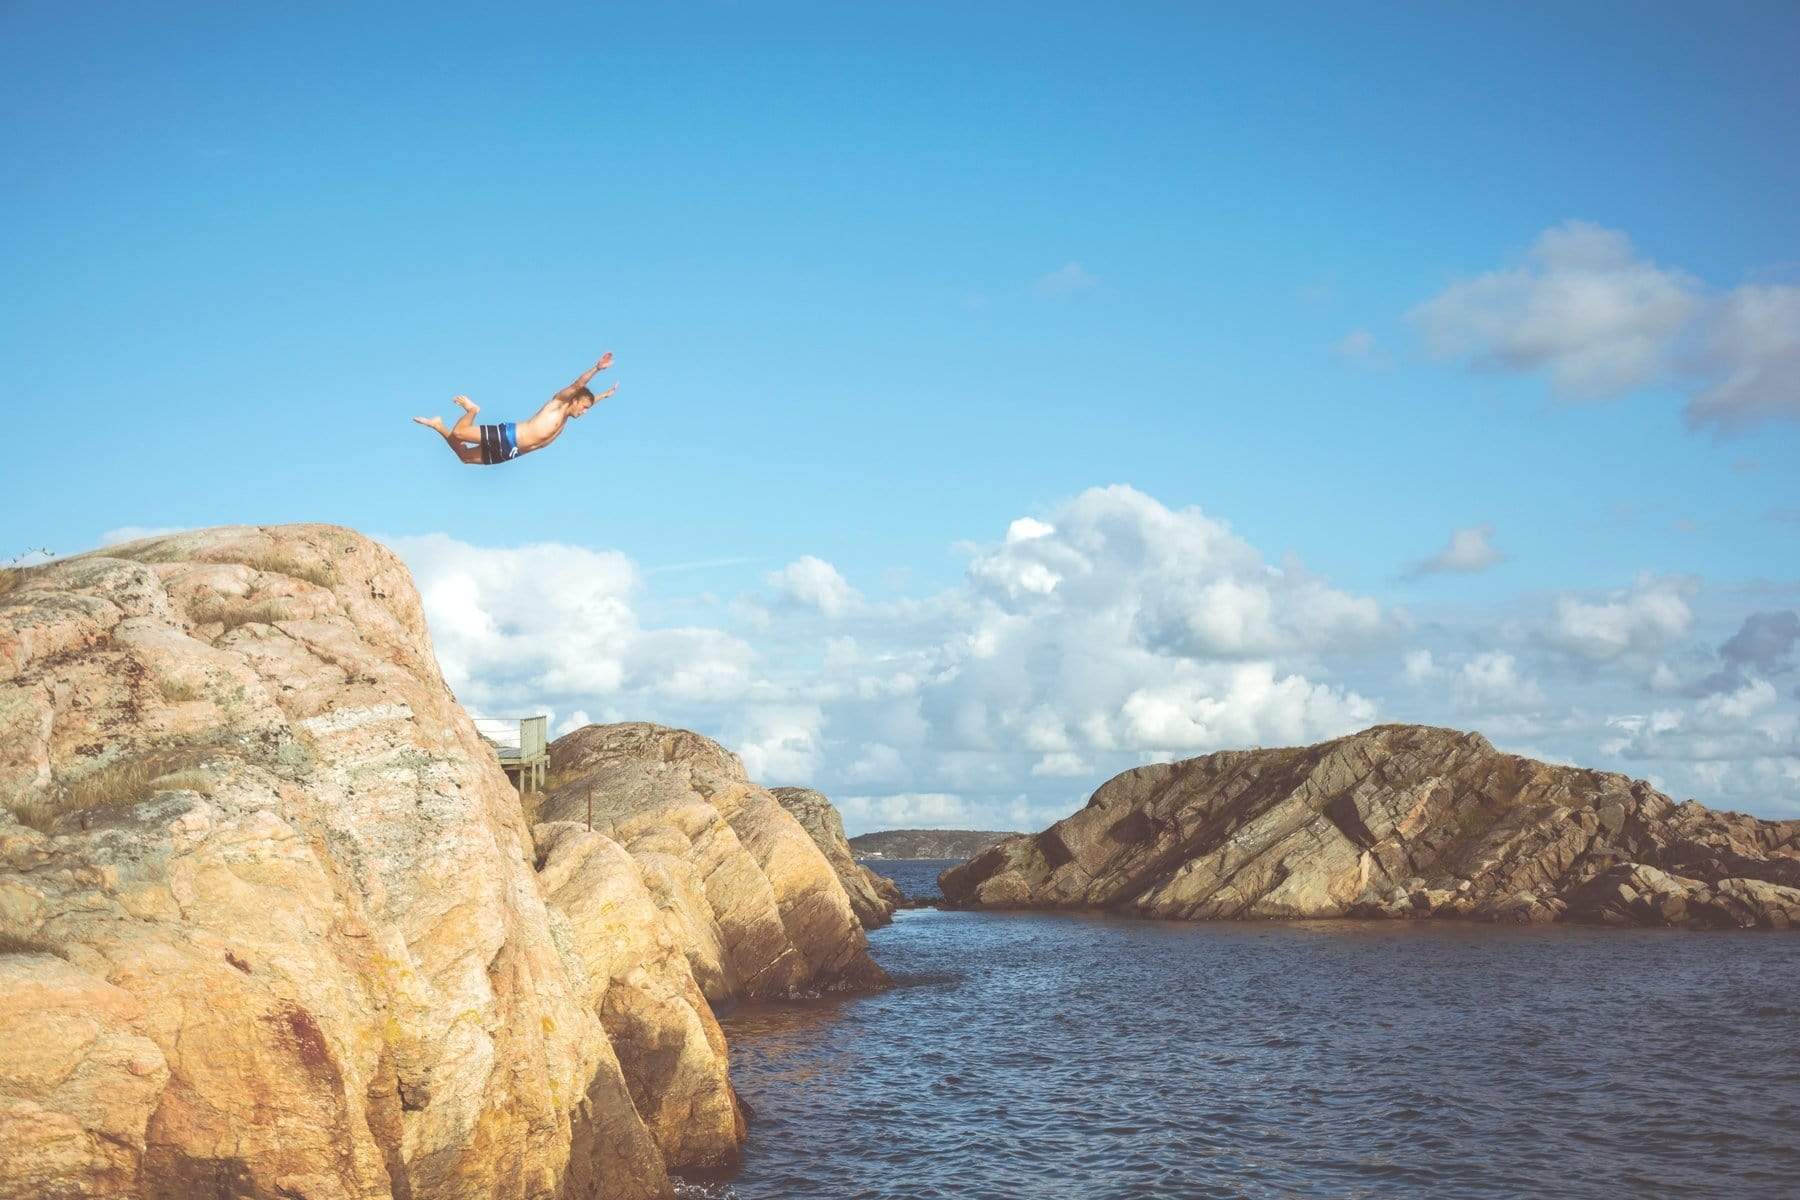 Man leaps off cliff into water